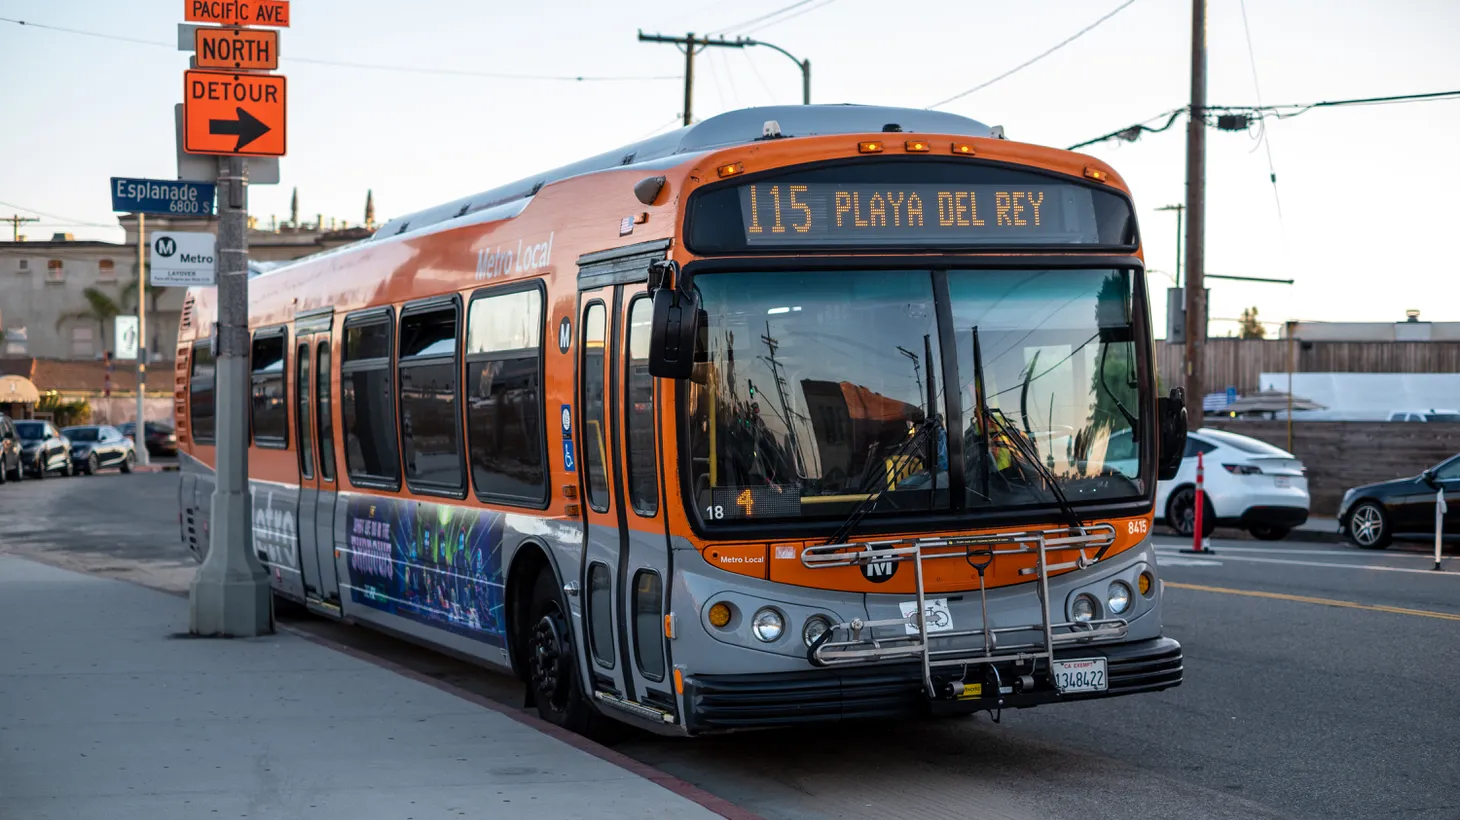 A Metro bus is parked in Playa Del Rey. The agency is expanding its rail and bus services to provide alternatives to personal vehicle usage in Southern California.